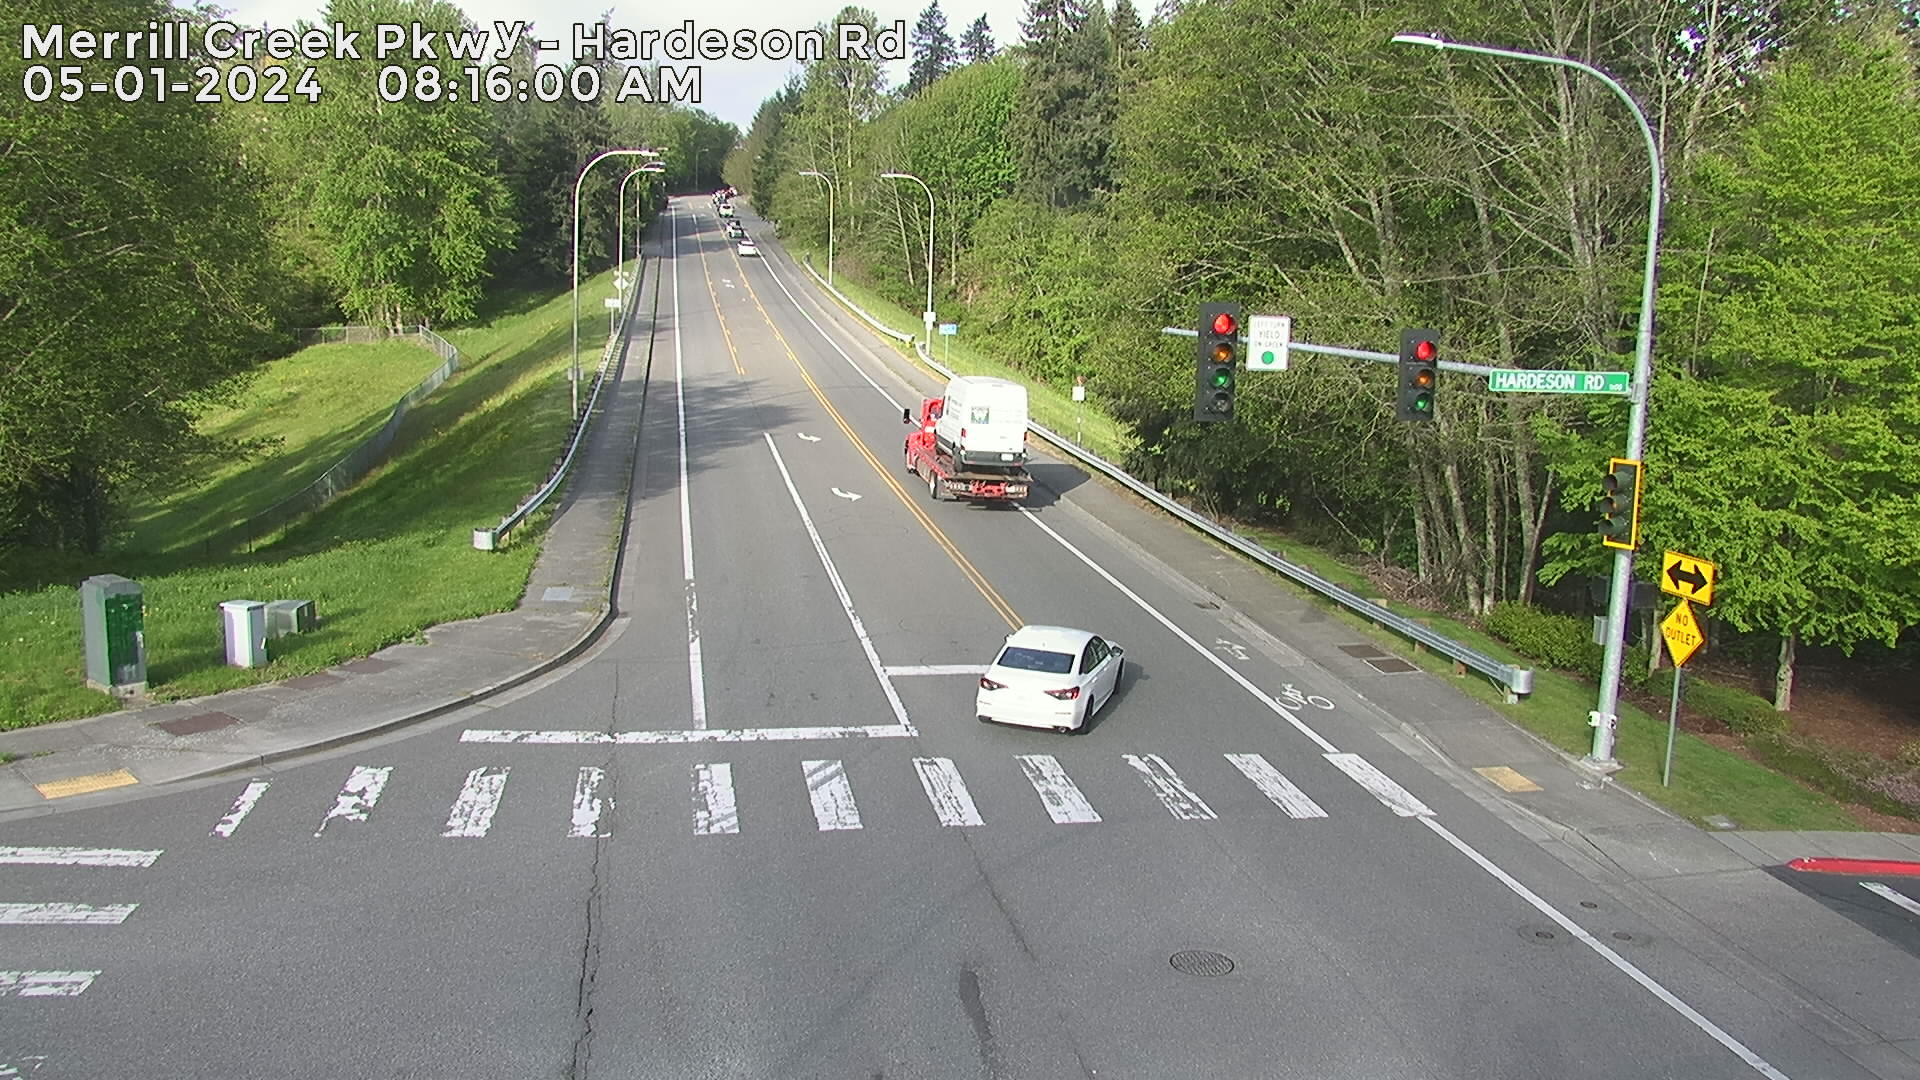 Camera at Merrill Creek Pkwy and Hardeson Rd